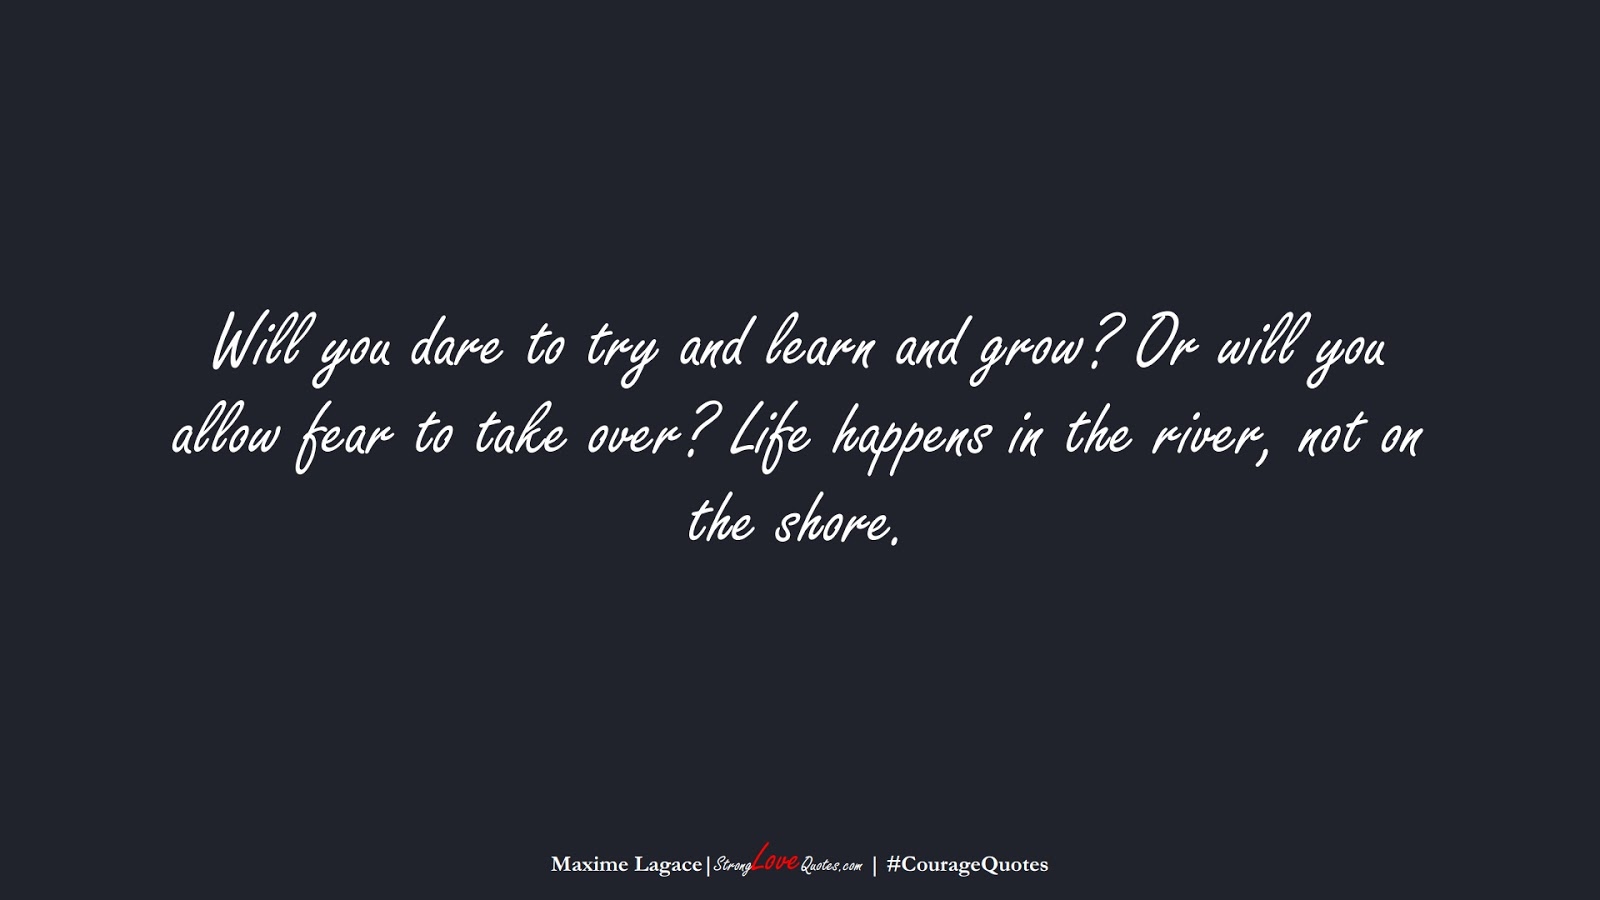 Will you dare to try and learn and grow? Or will you allow fear to take over? Life happens in the river, not on the shore. (Maxime Lagace);  #CourageQuotes